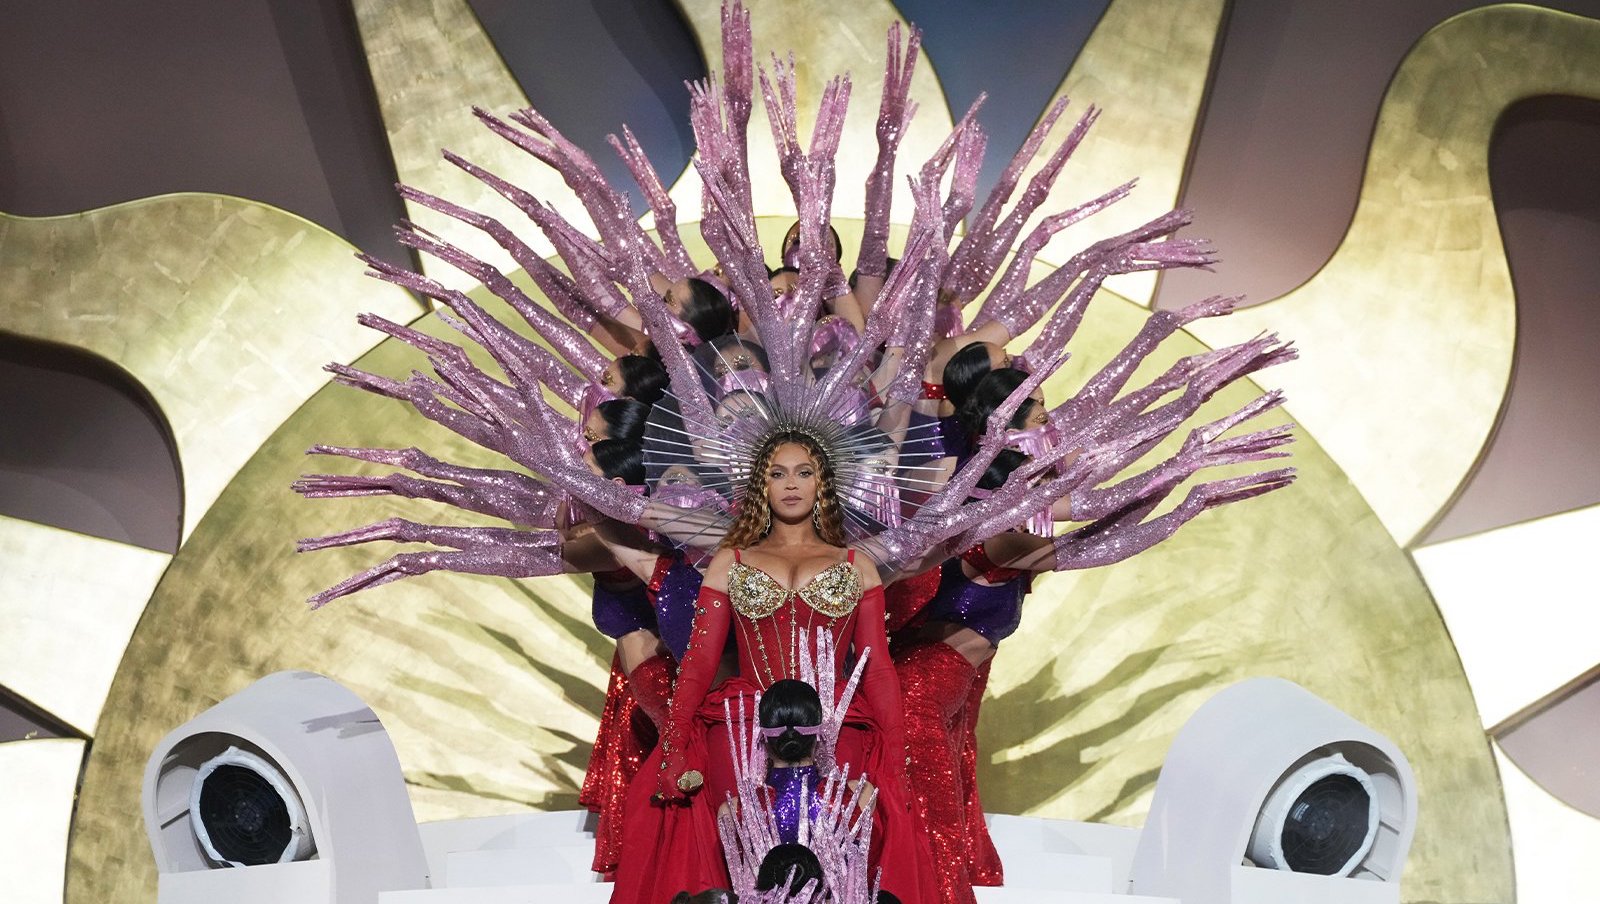 Beyonce Readying "Groundbreaking" 'Renaissance World Tour' with